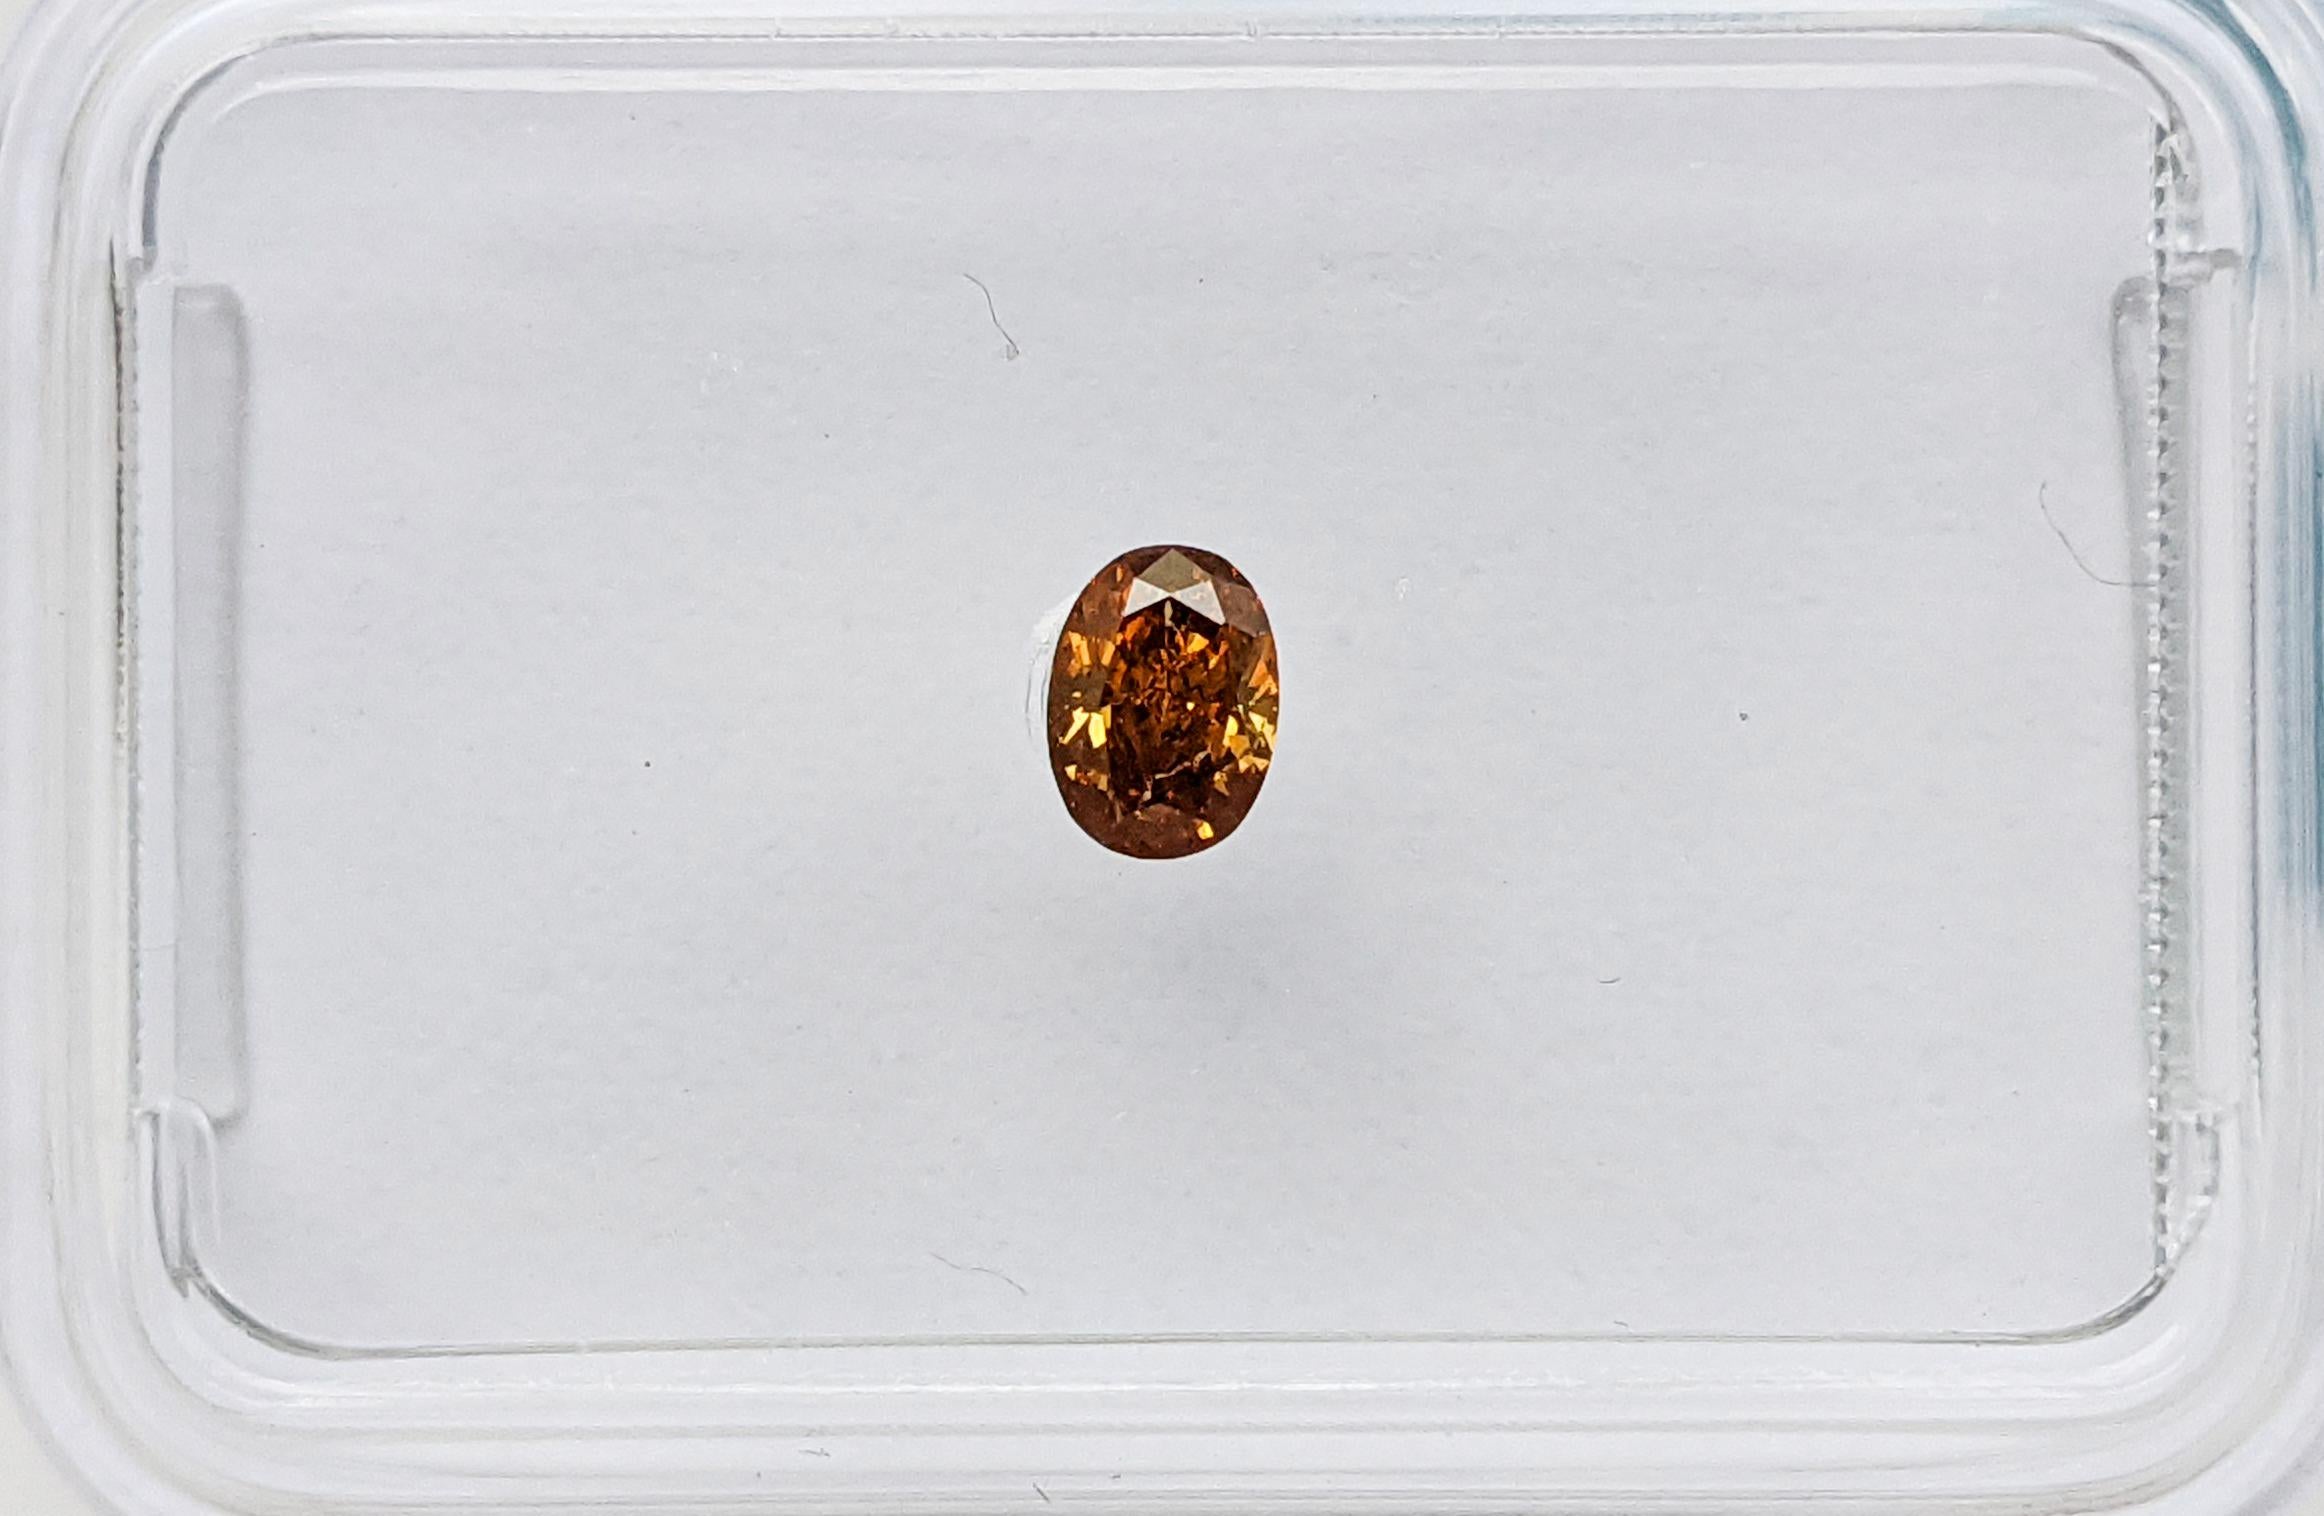 Here's a captivating 0.14ct Oval diamond, certified by IGI. Its striking Fancy Vivid Yellowish Orange hue brings warmth and vibrancy to life. With an SI1 clarity, this diamond offers both beauty and assurance, making it a standout choice for any